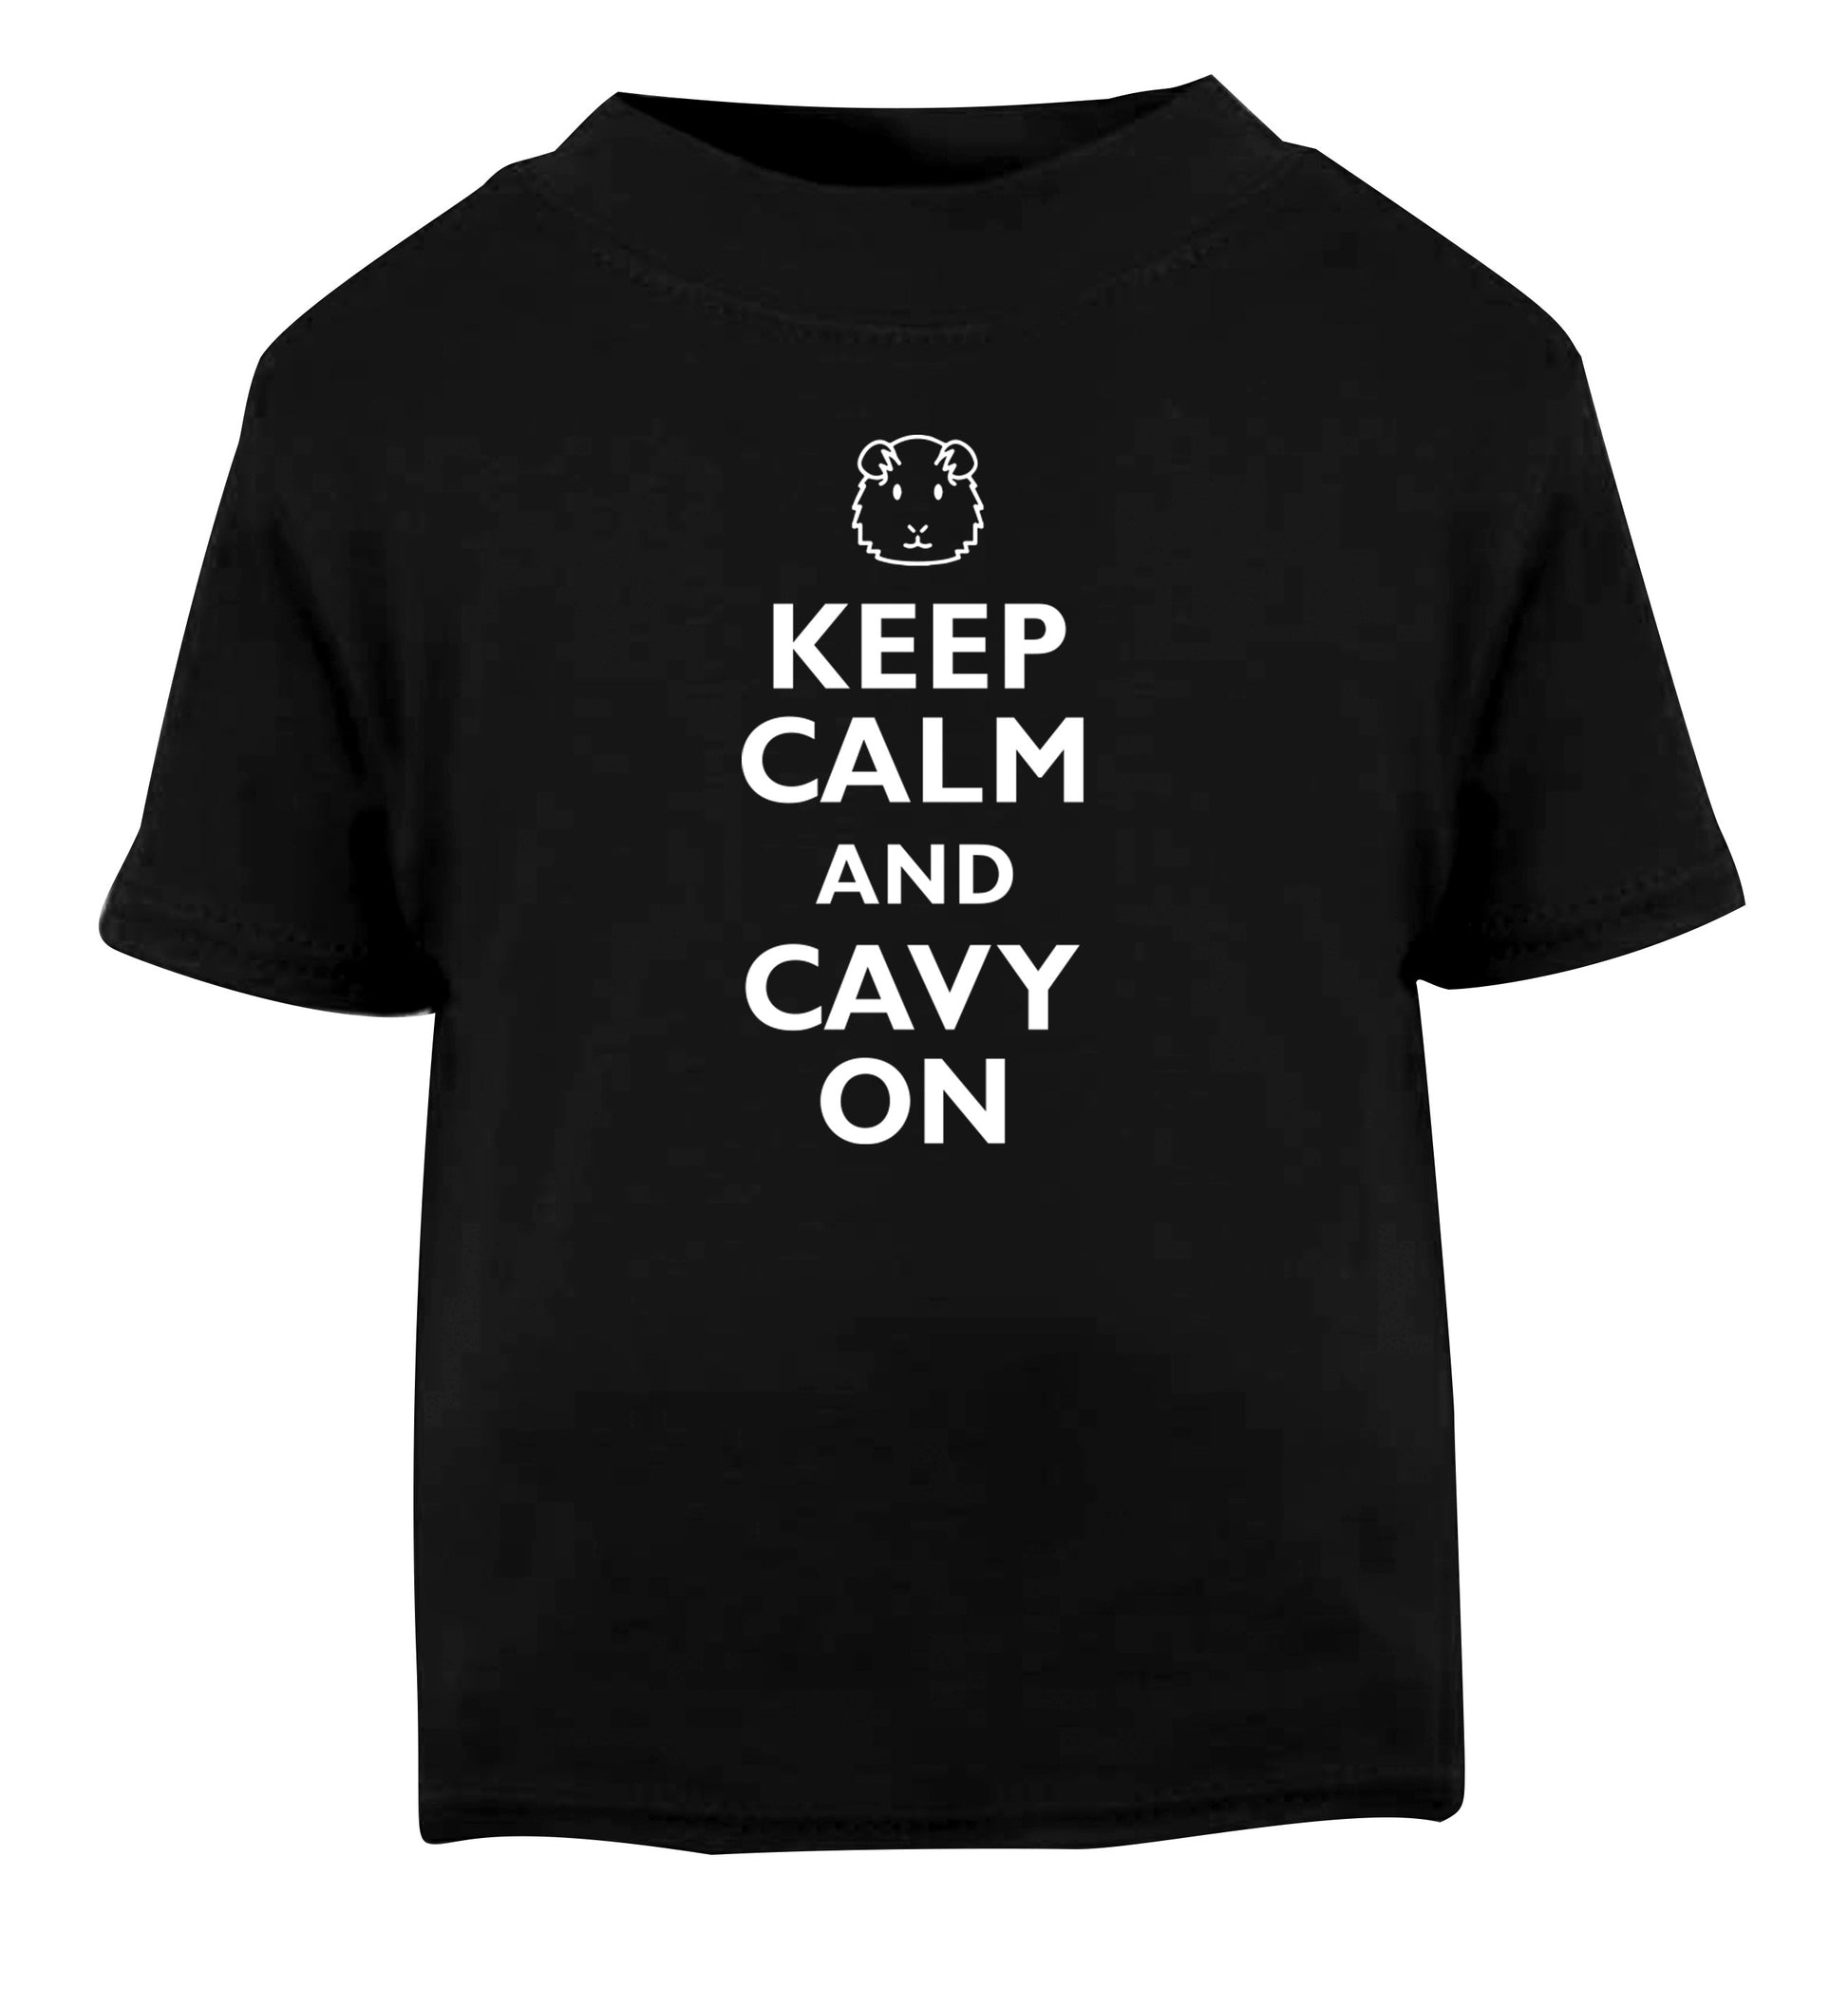 Keep calm and cavvy on Black Baby Toddler Tshirt 2 years